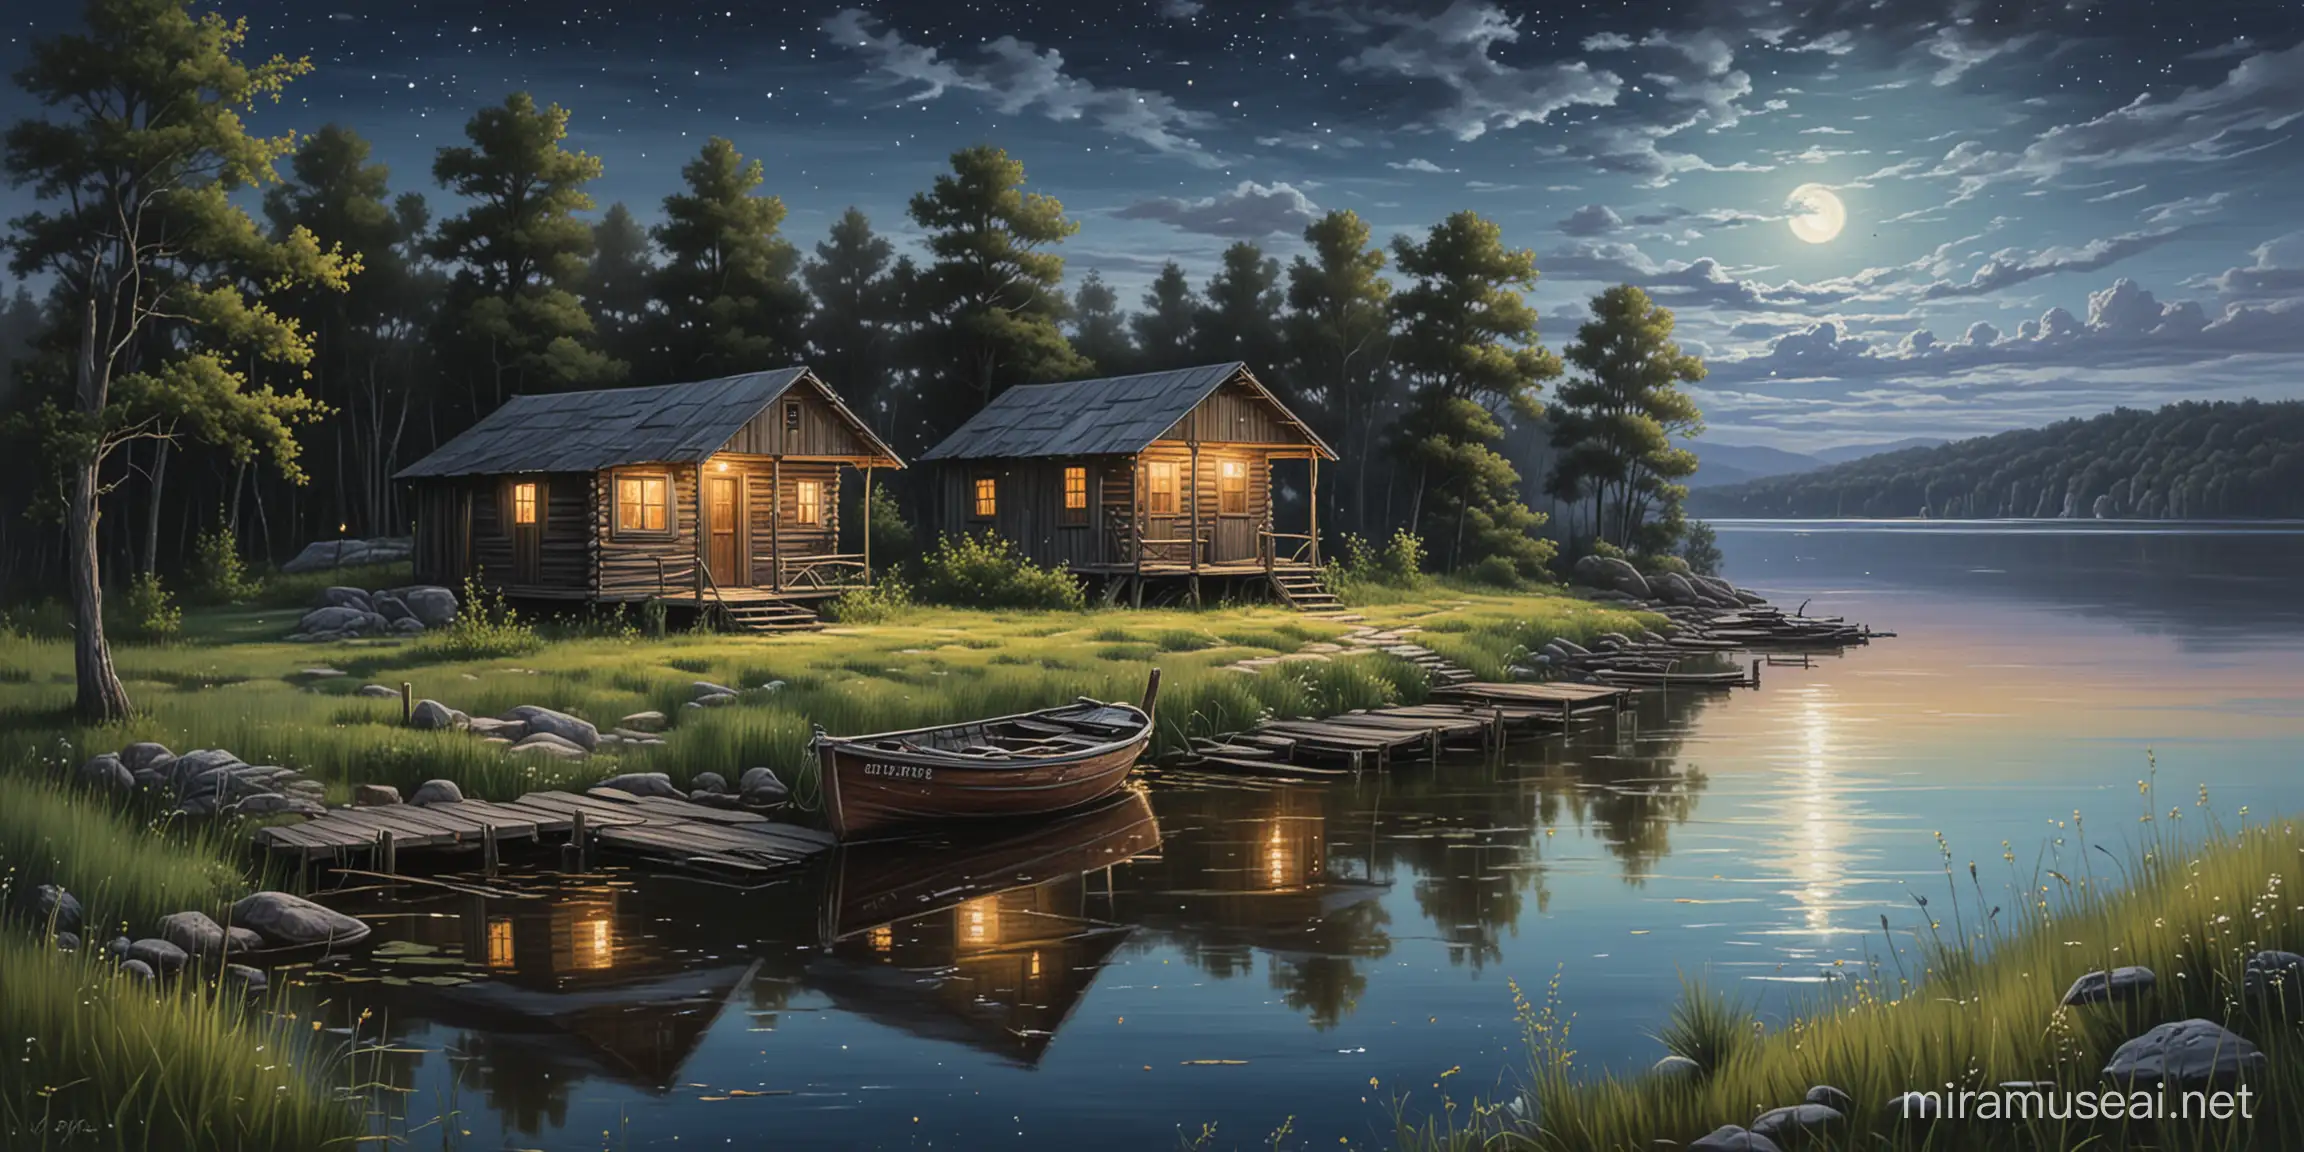 Moonlit Old Cabins by the Shore with Fireflies and Stars